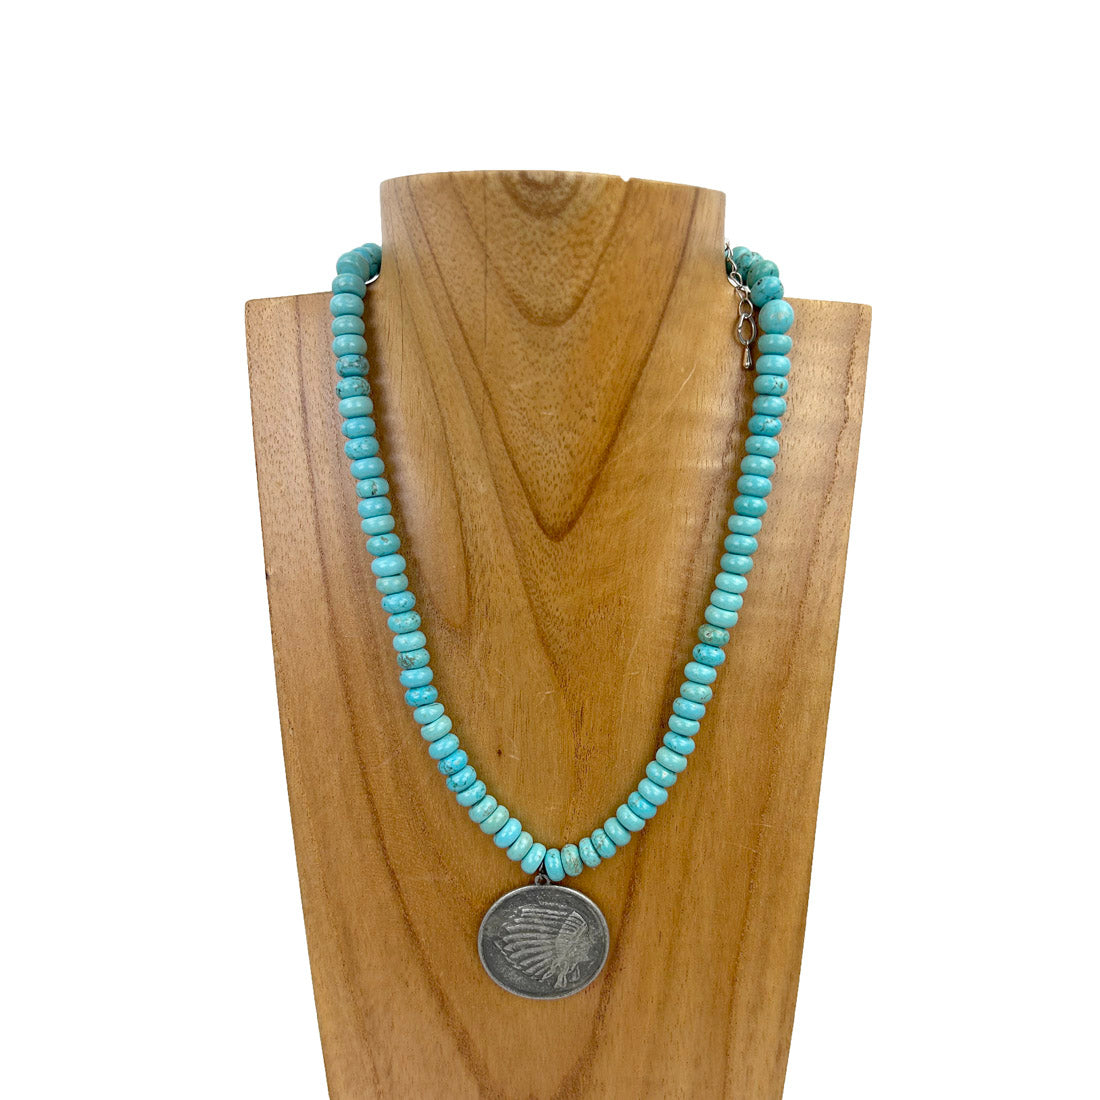 NKZ230930-45     17 inches roundel blue turquoise stone beads with silver metal Indian head Necklace